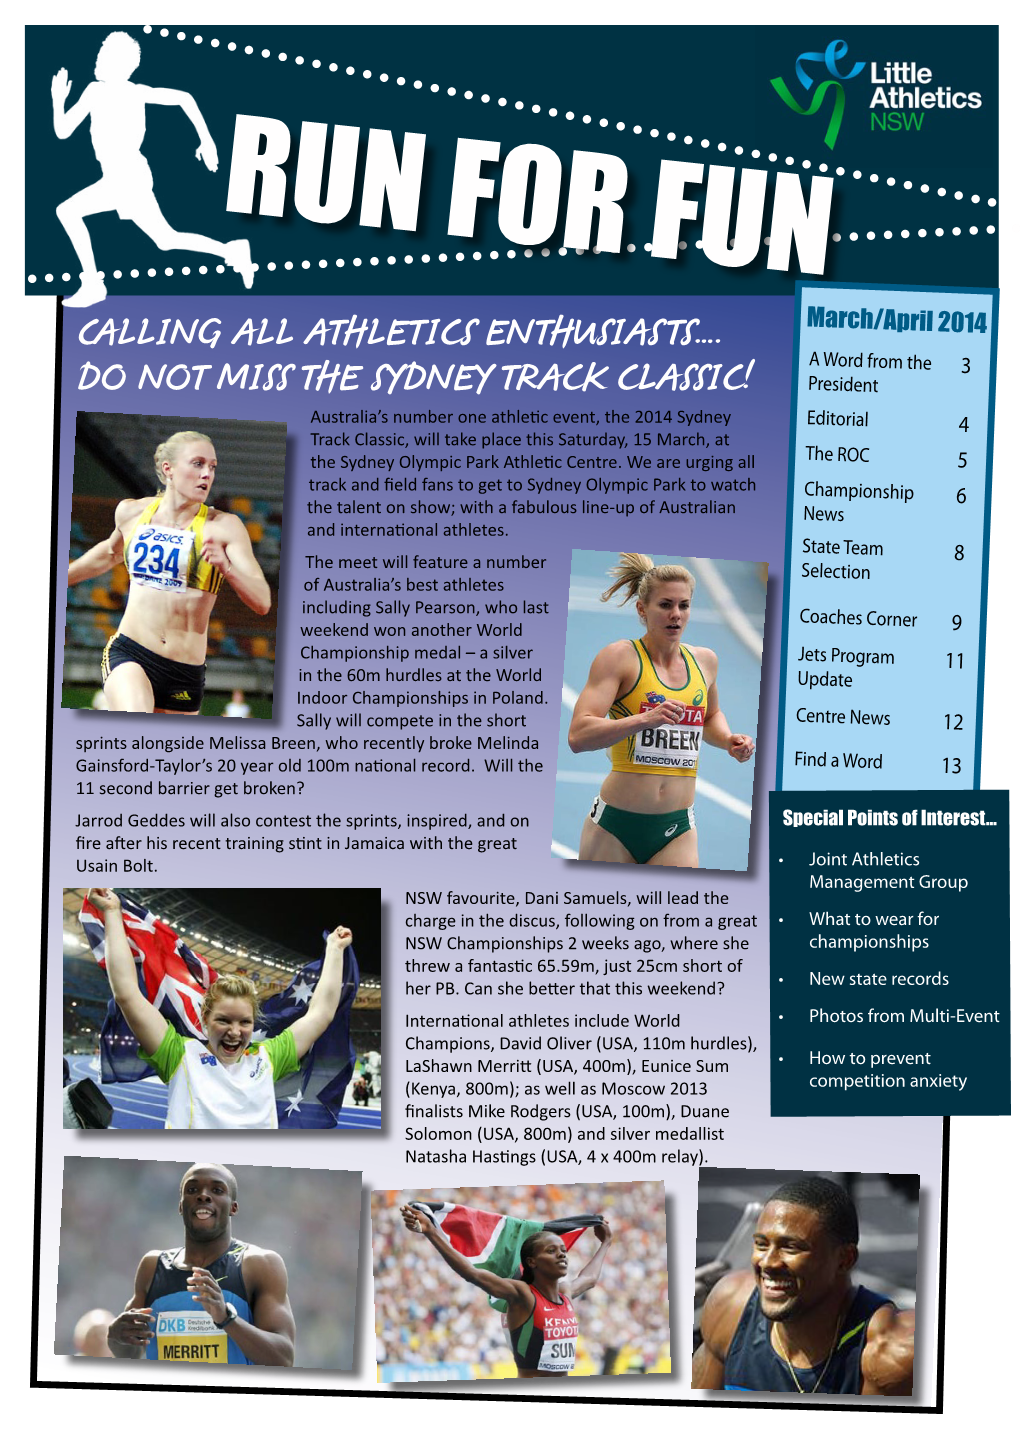 Calling All Athletics Enthusiasts…. Do Not Miss the Sydney Track Classic!